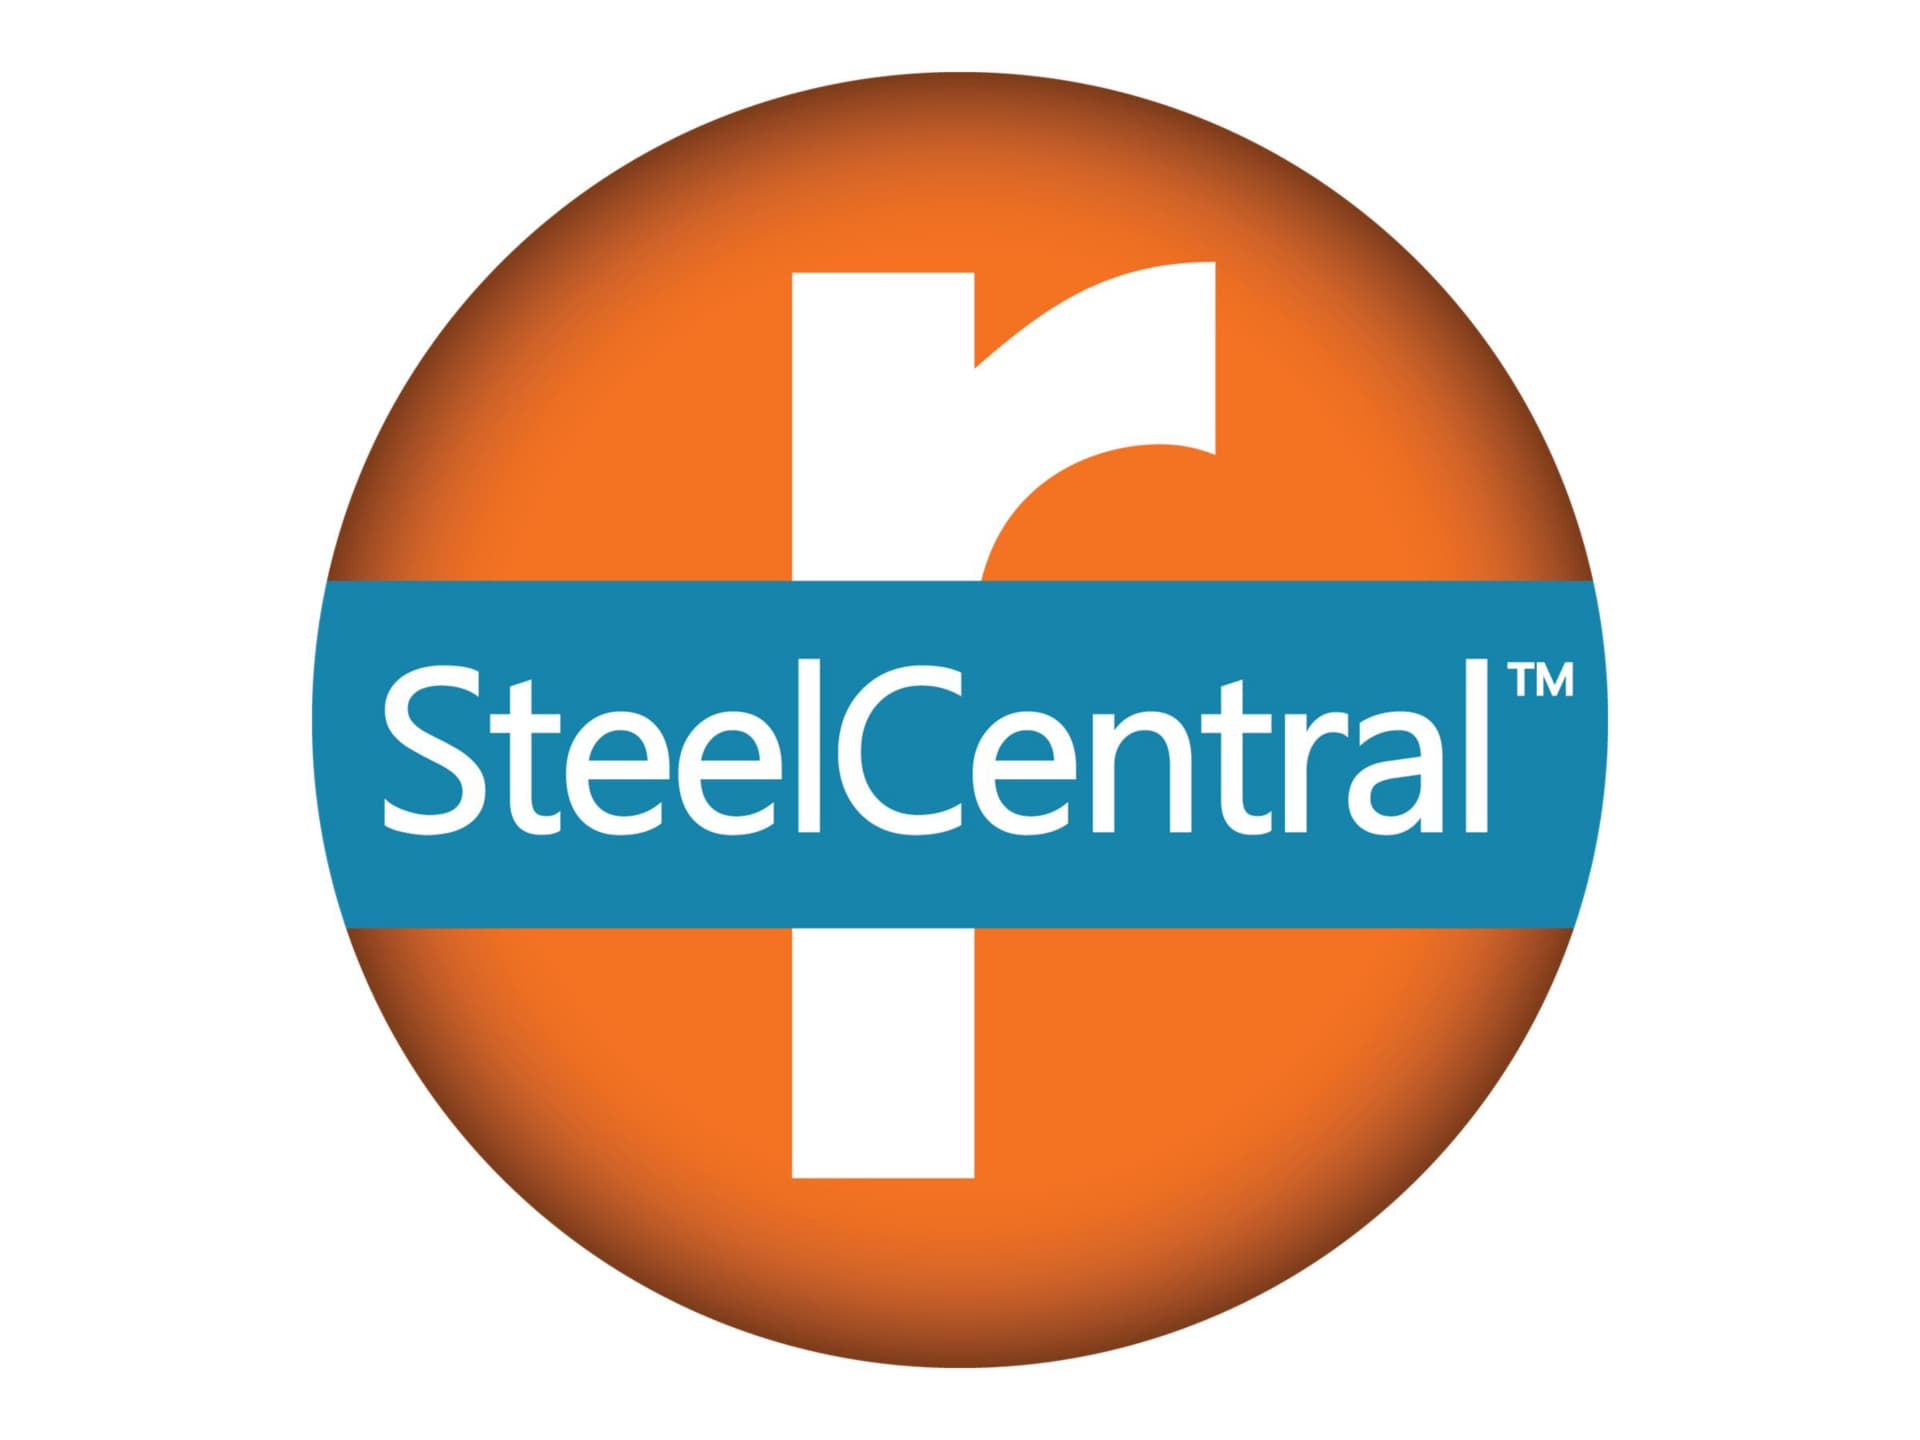 SteelCentral Flow Gateway Virtual Edition - license - 100000 flows per minute